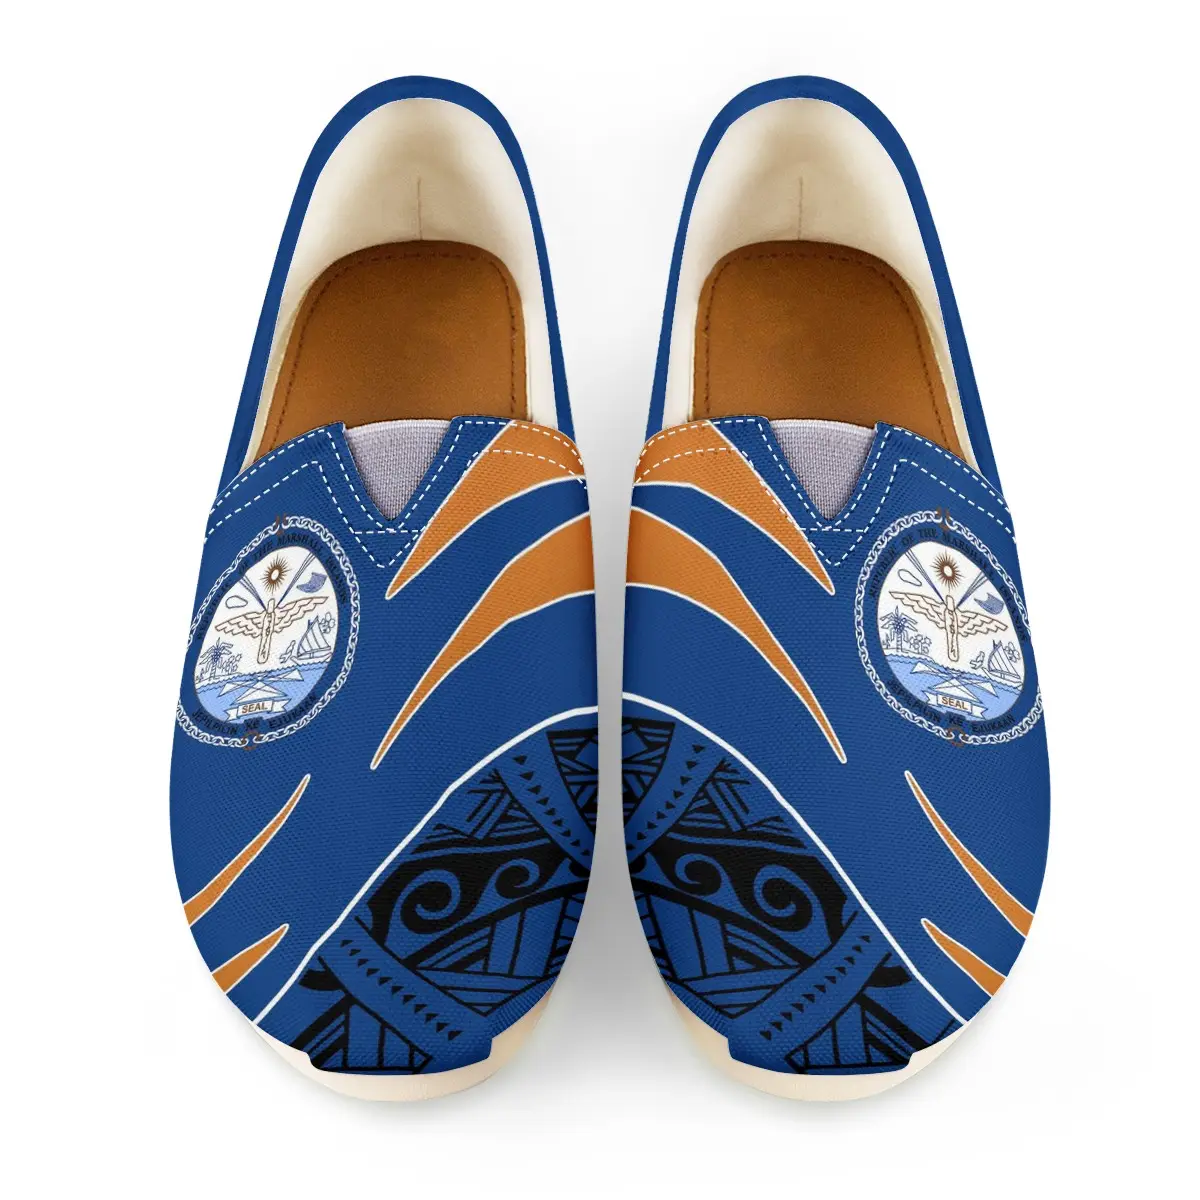 Shoes Blue Polynesian Tribal Republic Of Marshall Island Flag Sorority Flats Shoes For Women Loafers Comfortable Ladies Shoe